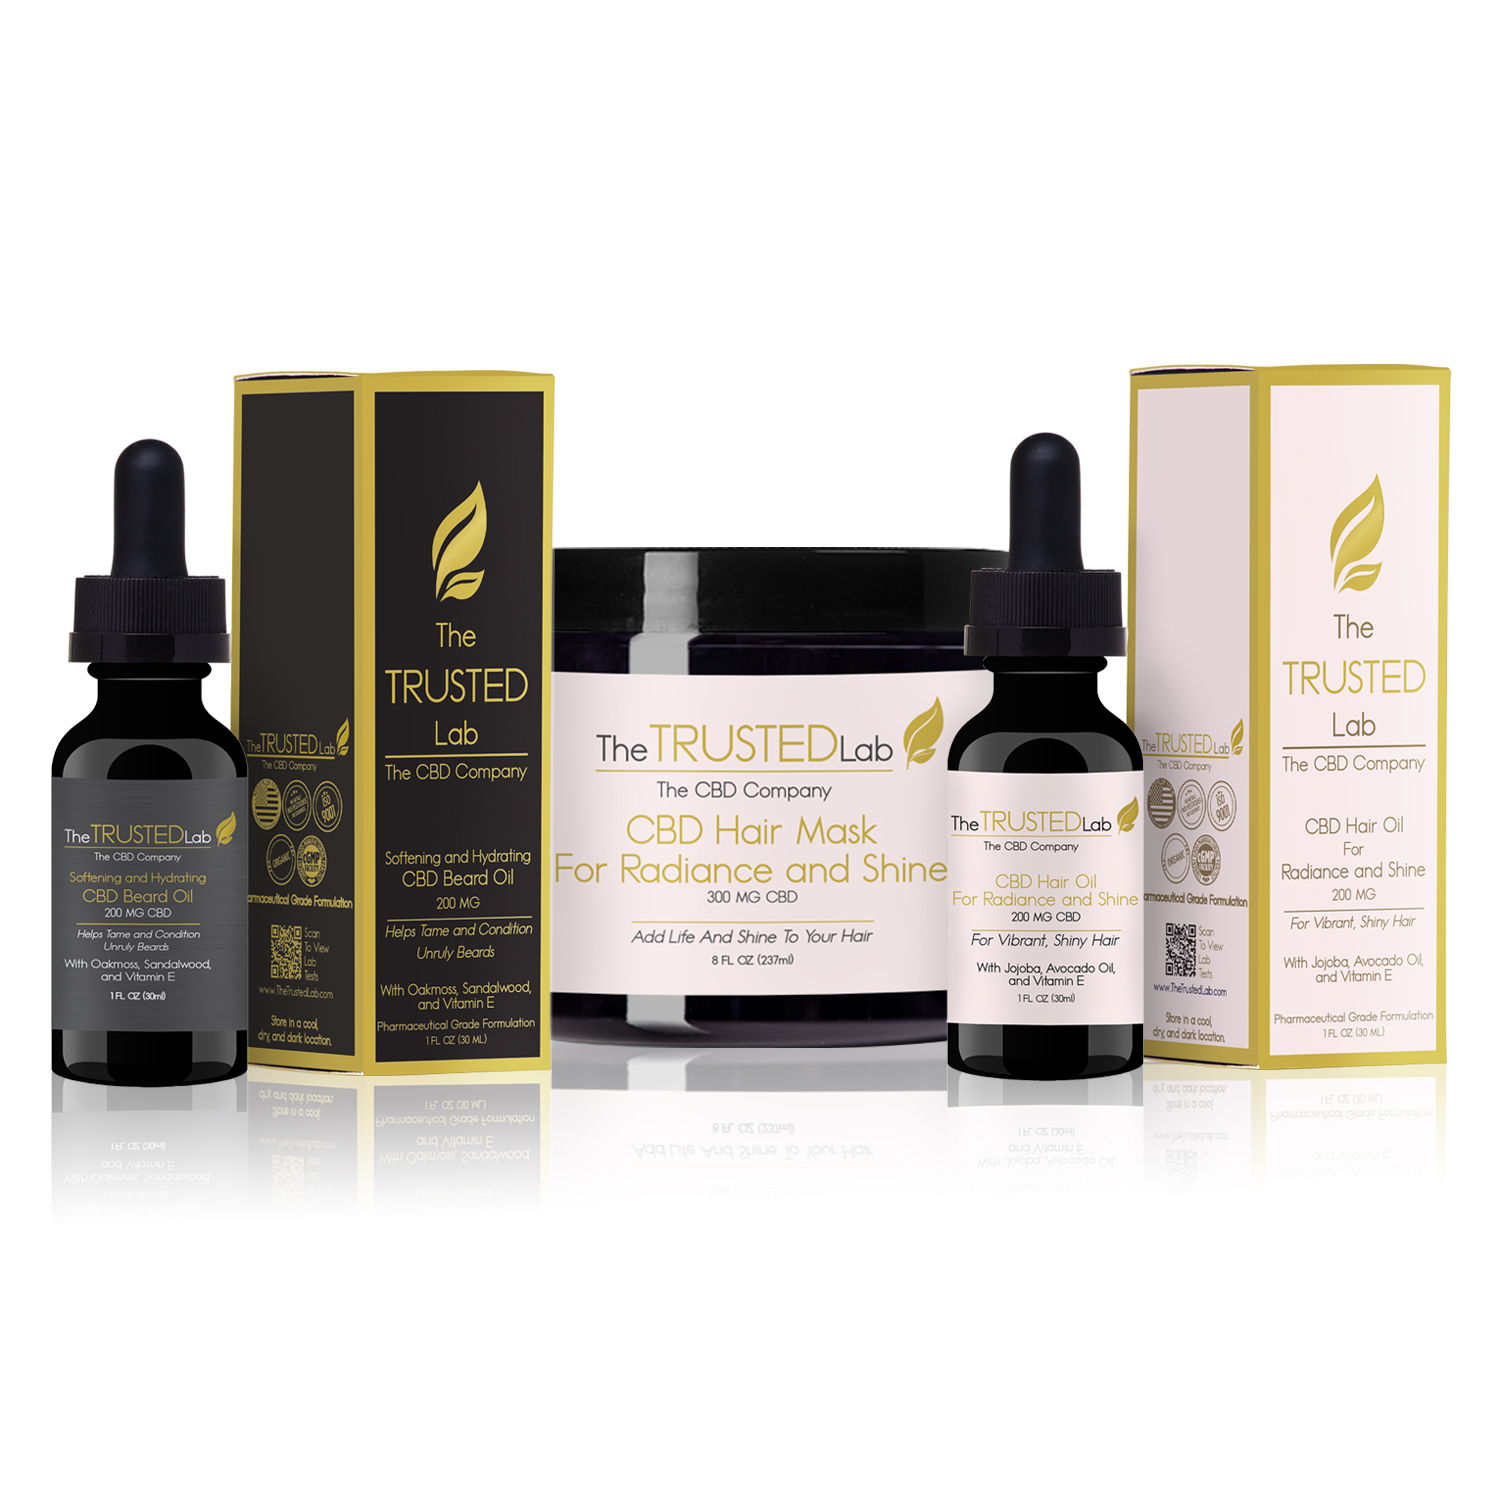 CBD Hair and Beauty products